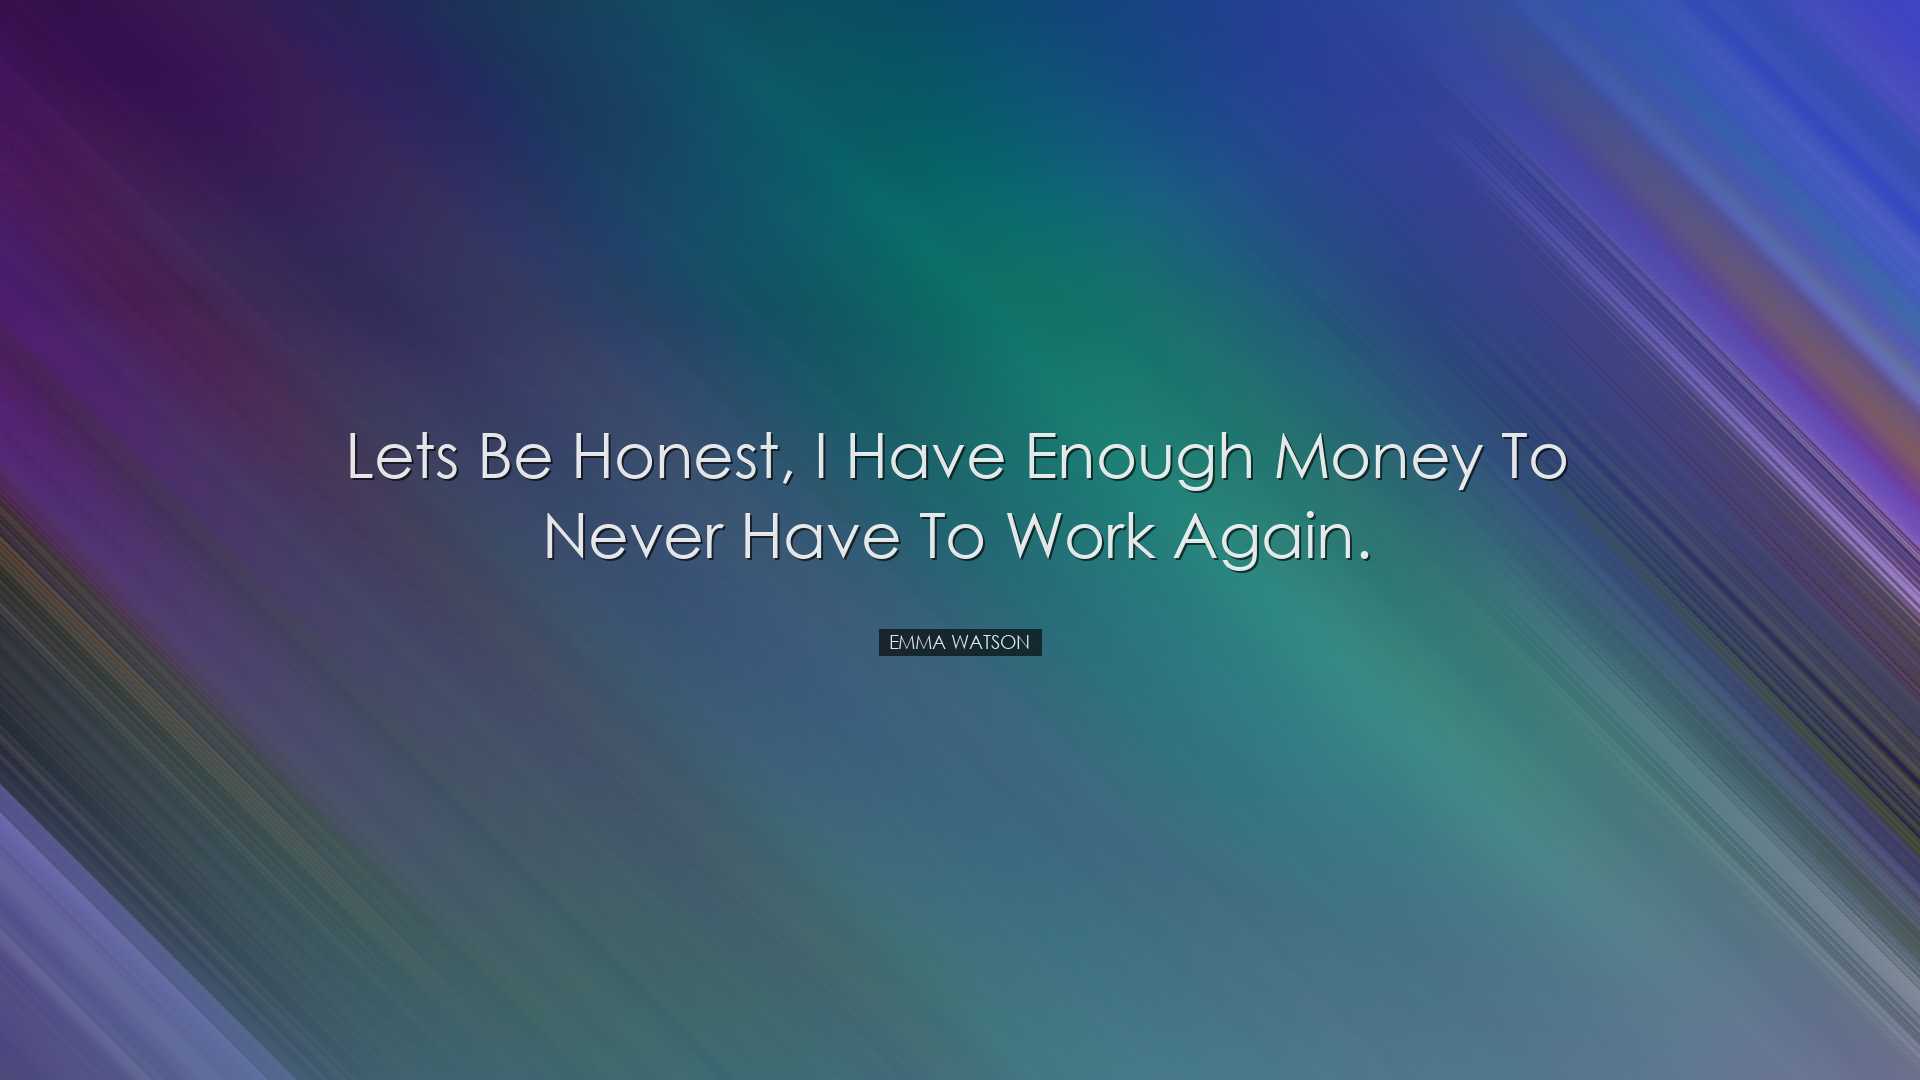 Lets be honest, I have enough money to never have to work again. -